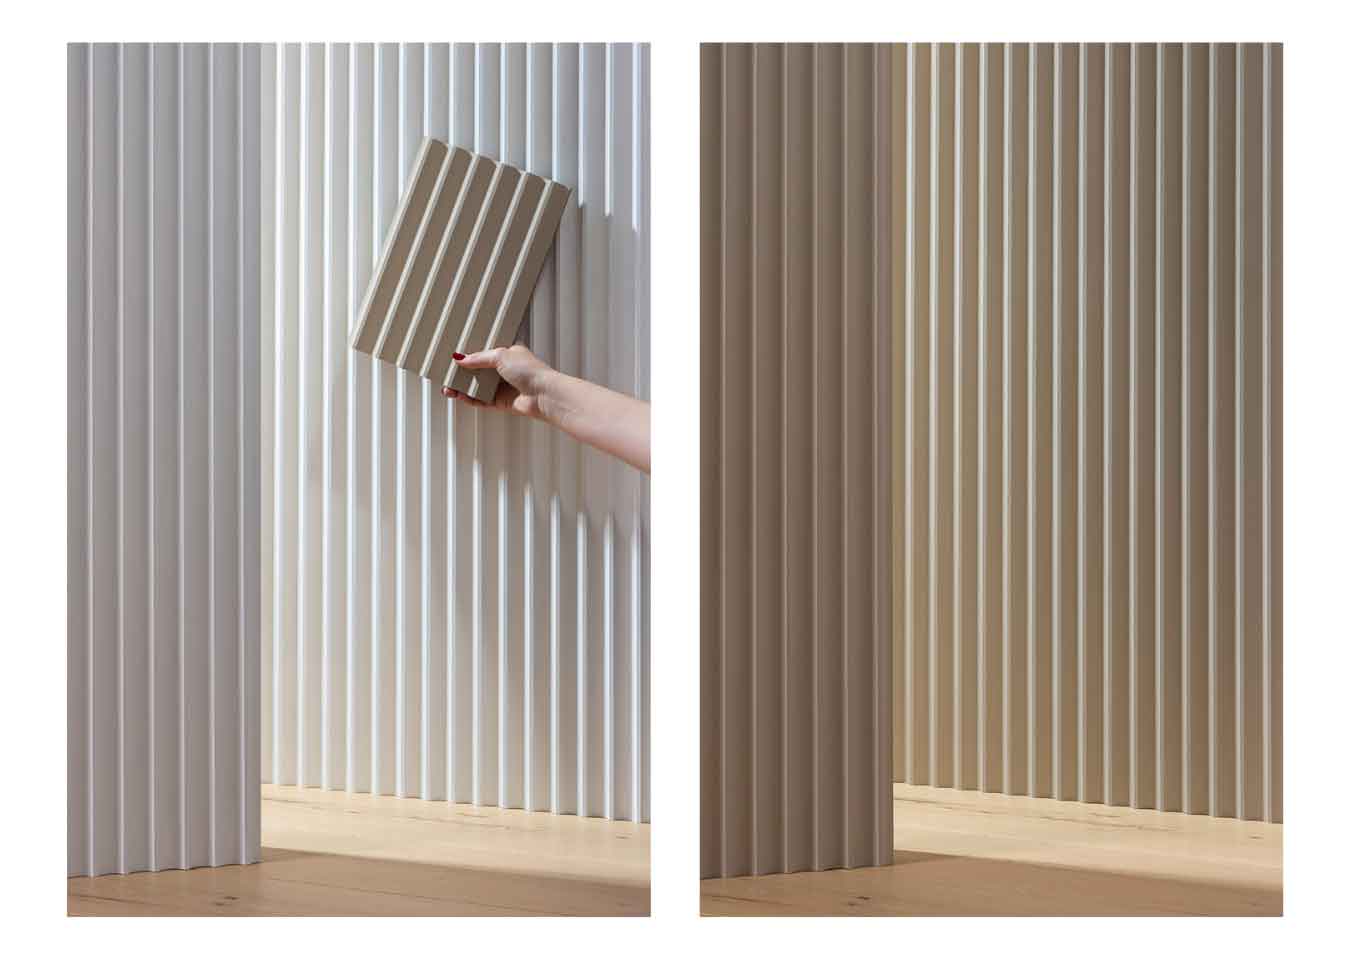 Left: Neutral painted Fluted sample held up against primed MDF wall panels. Right: neutral painted Fluted wall panels.